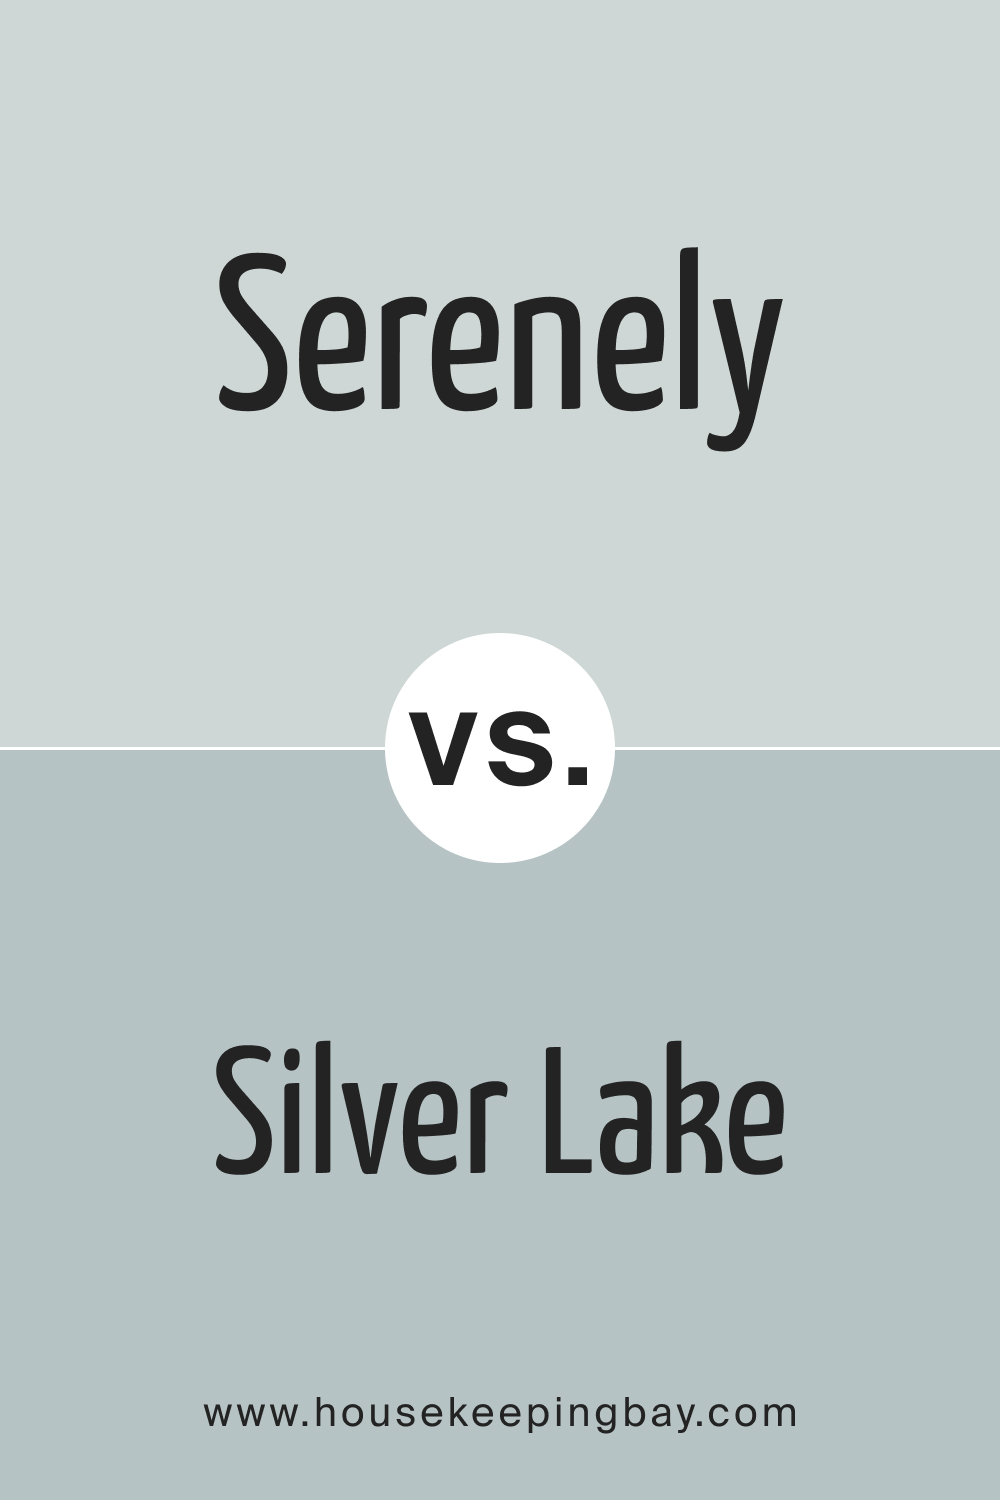 SW 9632 Serenely vs. SW 9633 Silver Lake